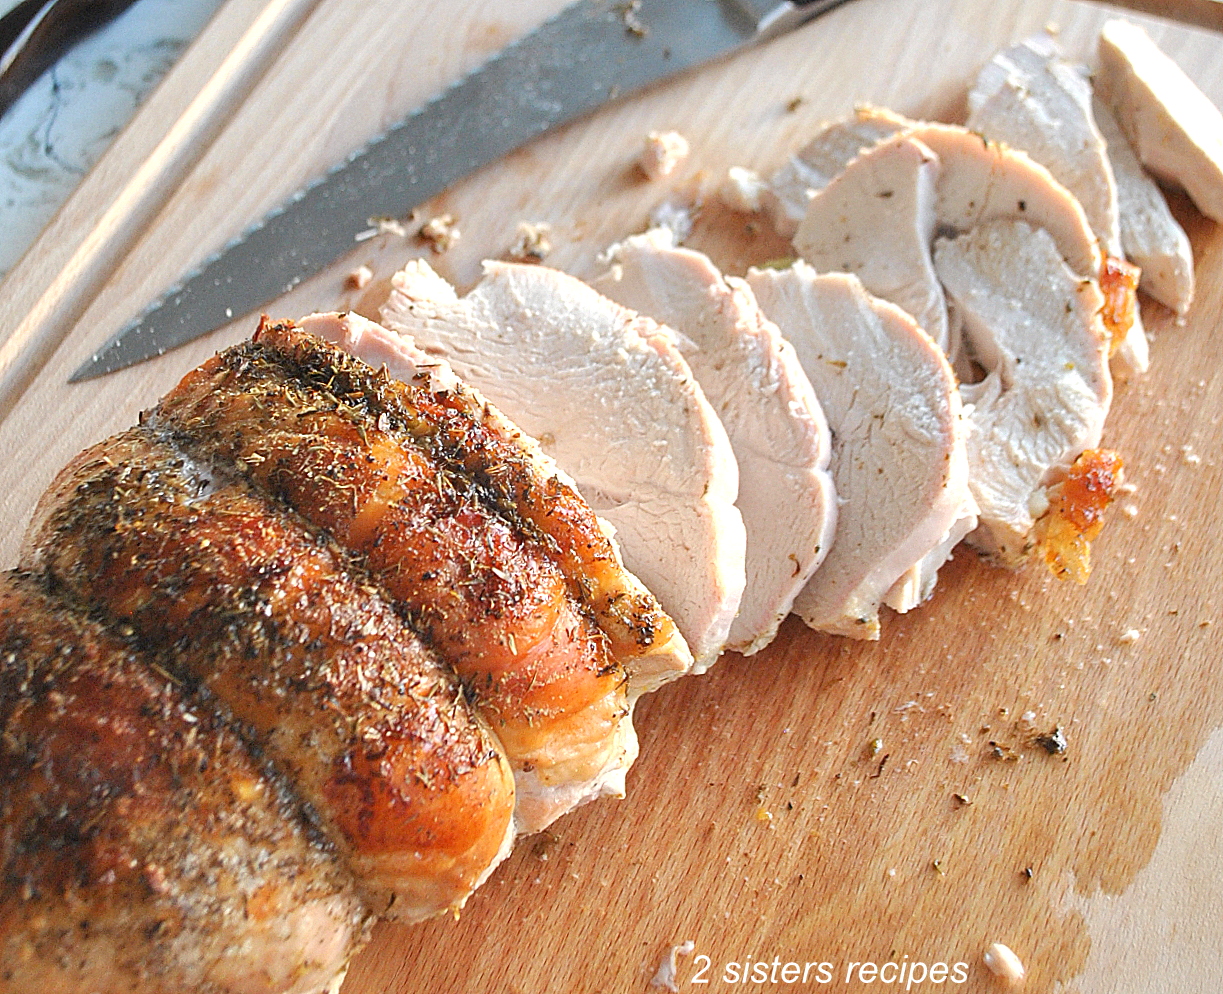 Top 12 Favorite Recipes for 2022 is A turkey breast sliced on a wood cutting board. by 2sistersrecipes.com